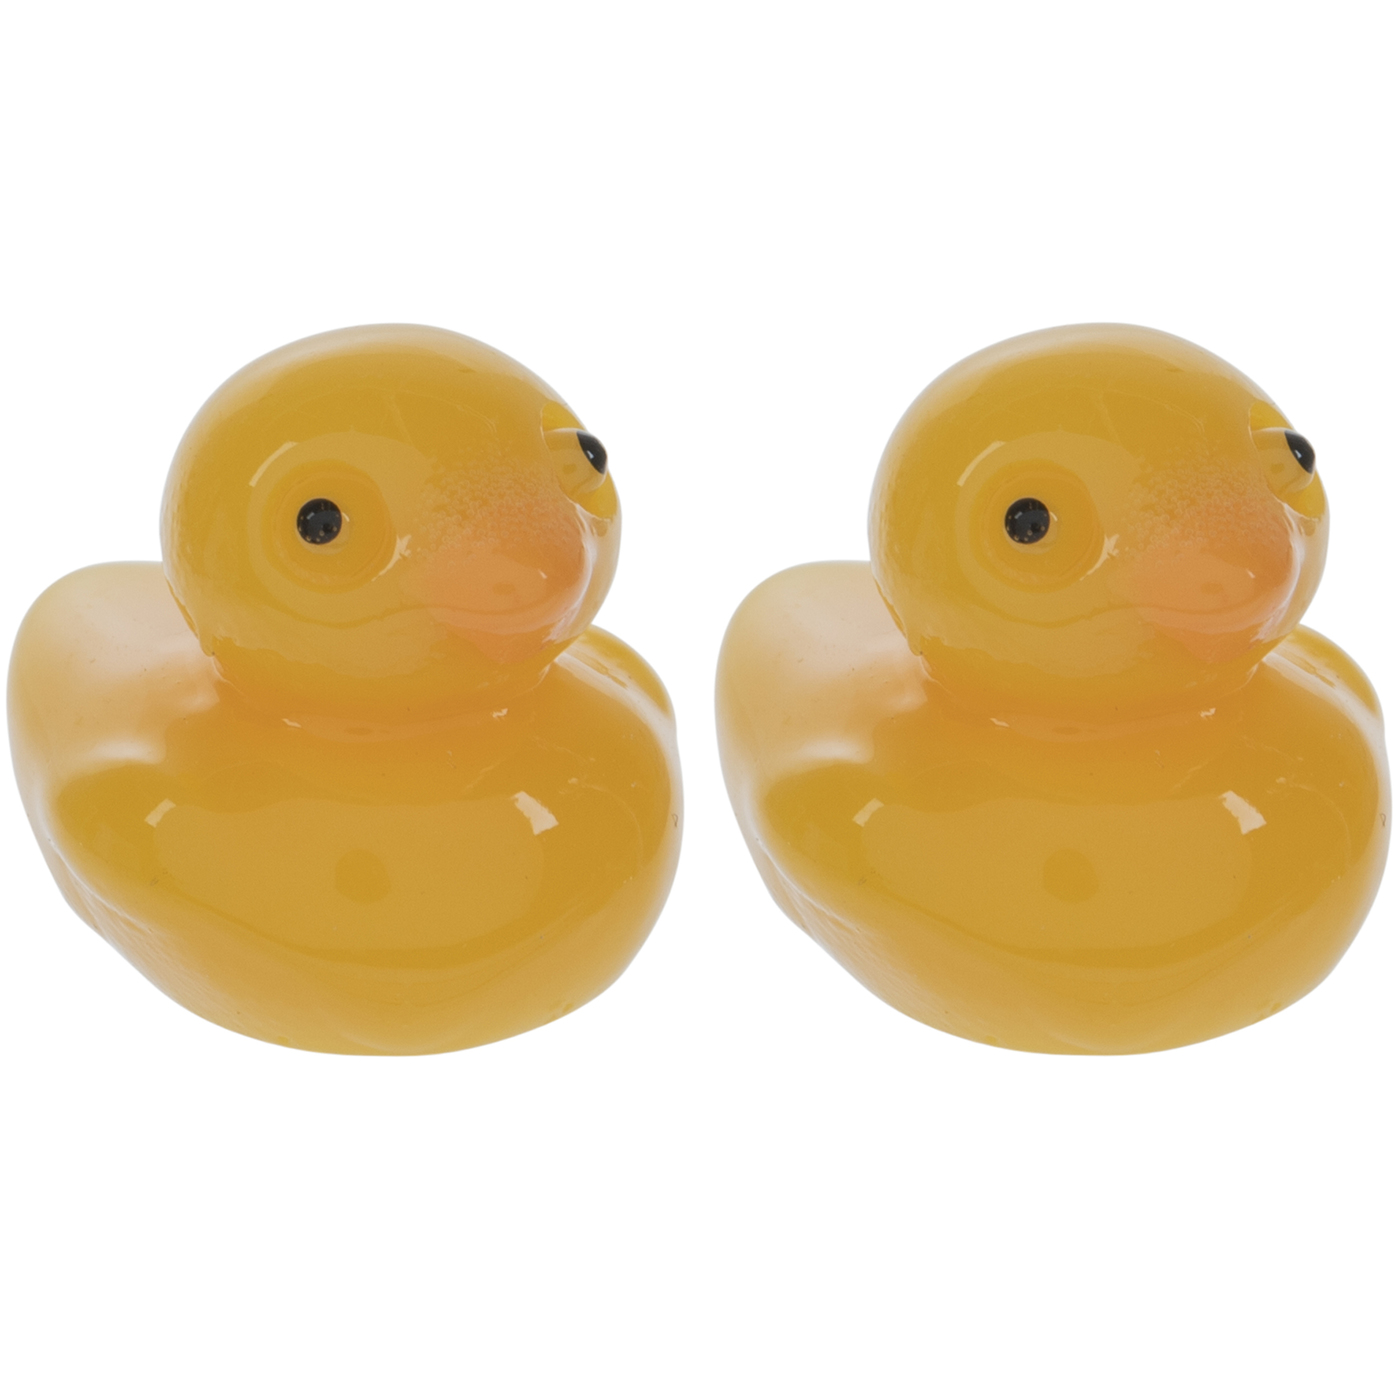 Detail Rubber Duckies Images Nomer 26